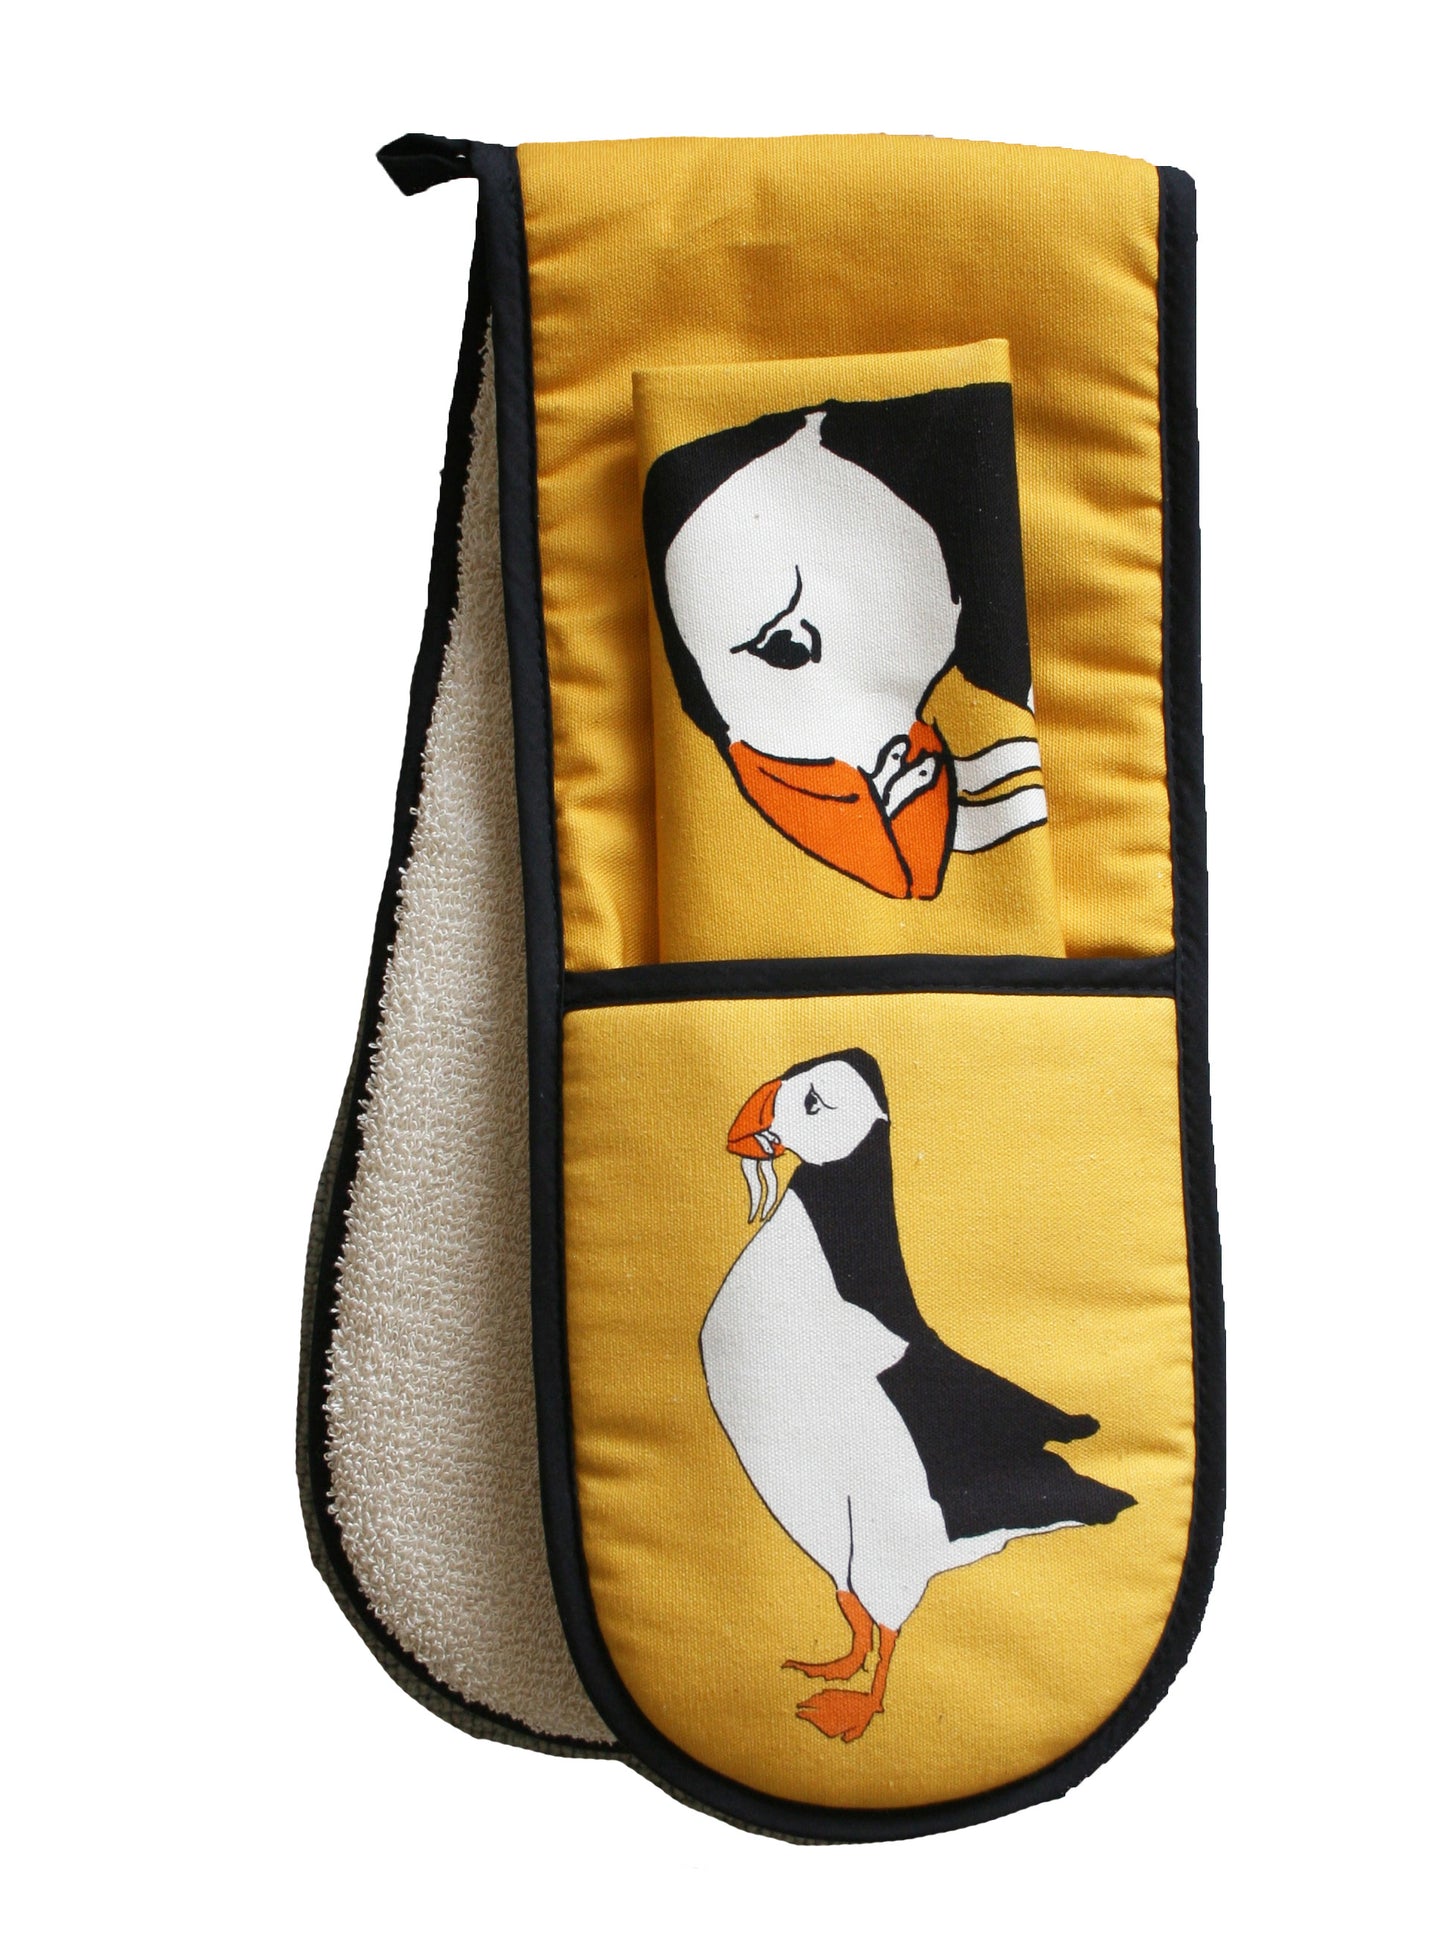 Puffin Oven Gloves